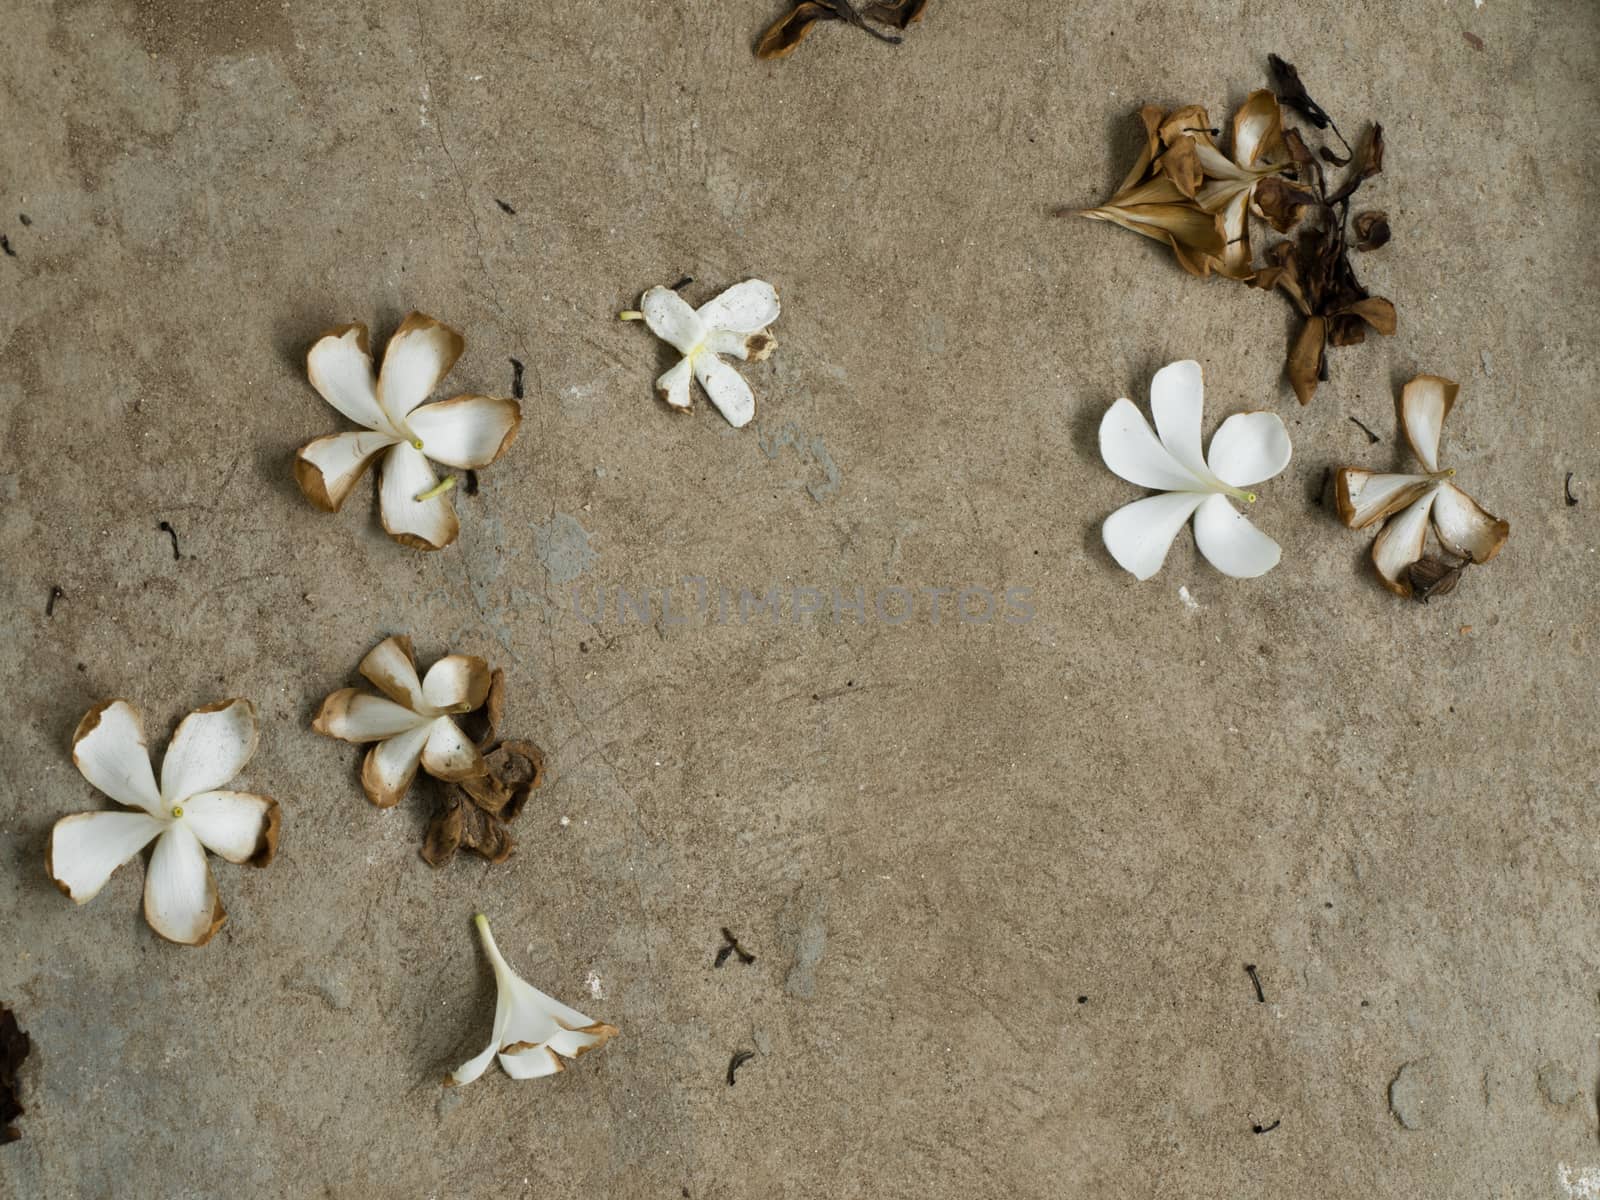 FLOWERS ON THE CONCRETE GROUND by PrettyTG